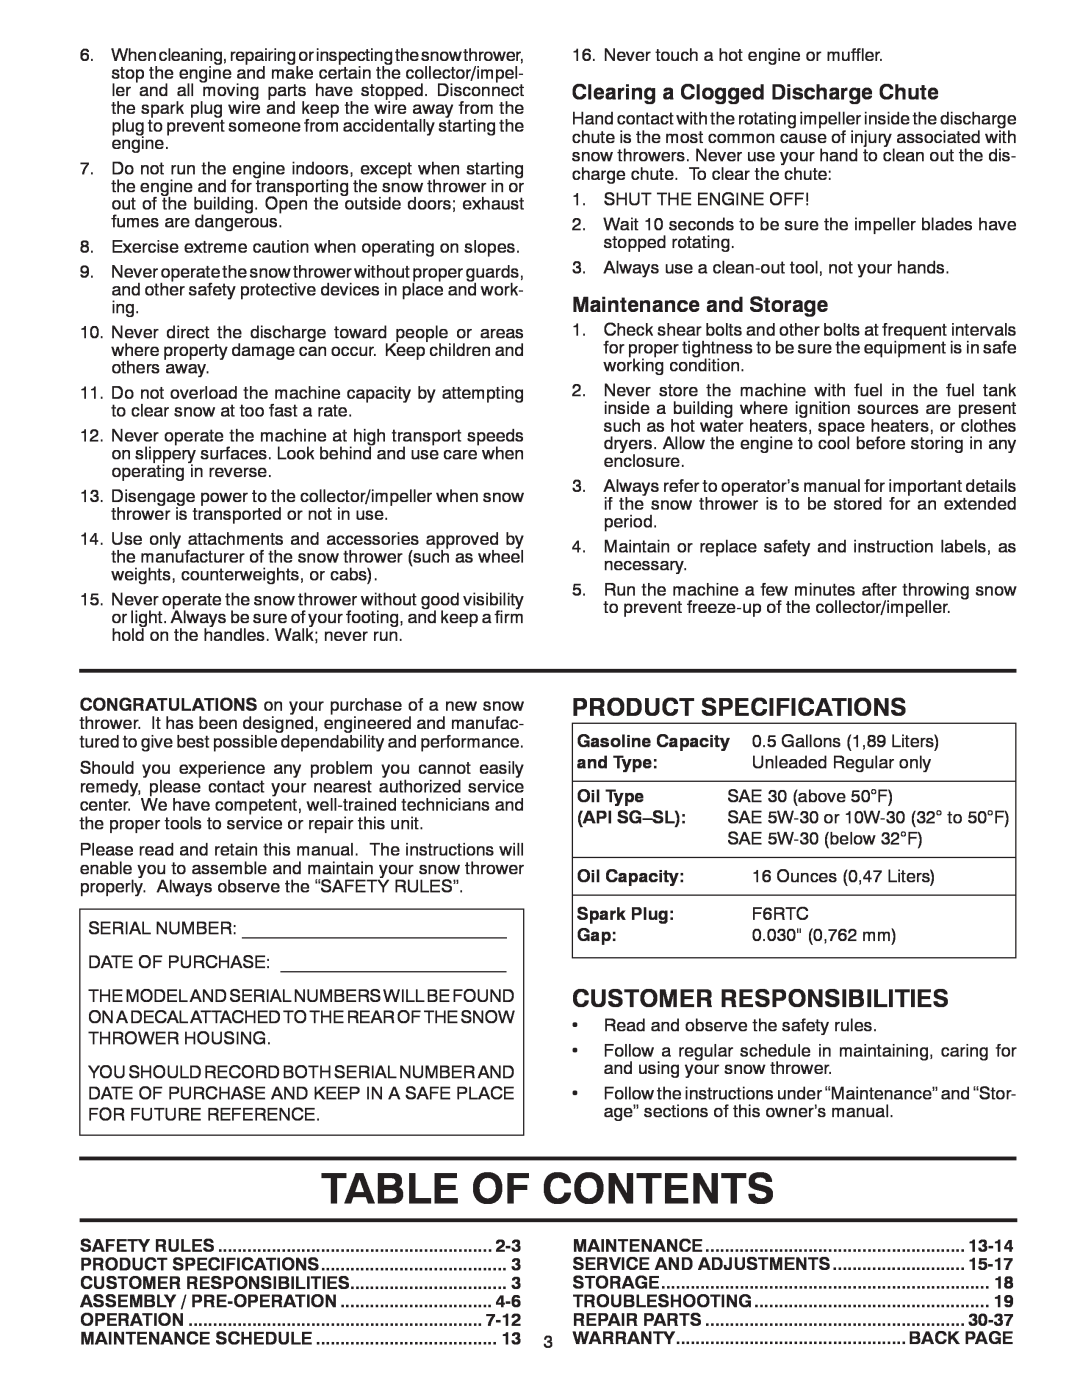 Poulan 96192004501 Table Of Contents, Product Specifications, Customer Responsibilities, Maintenance and Storage, Oil Type 